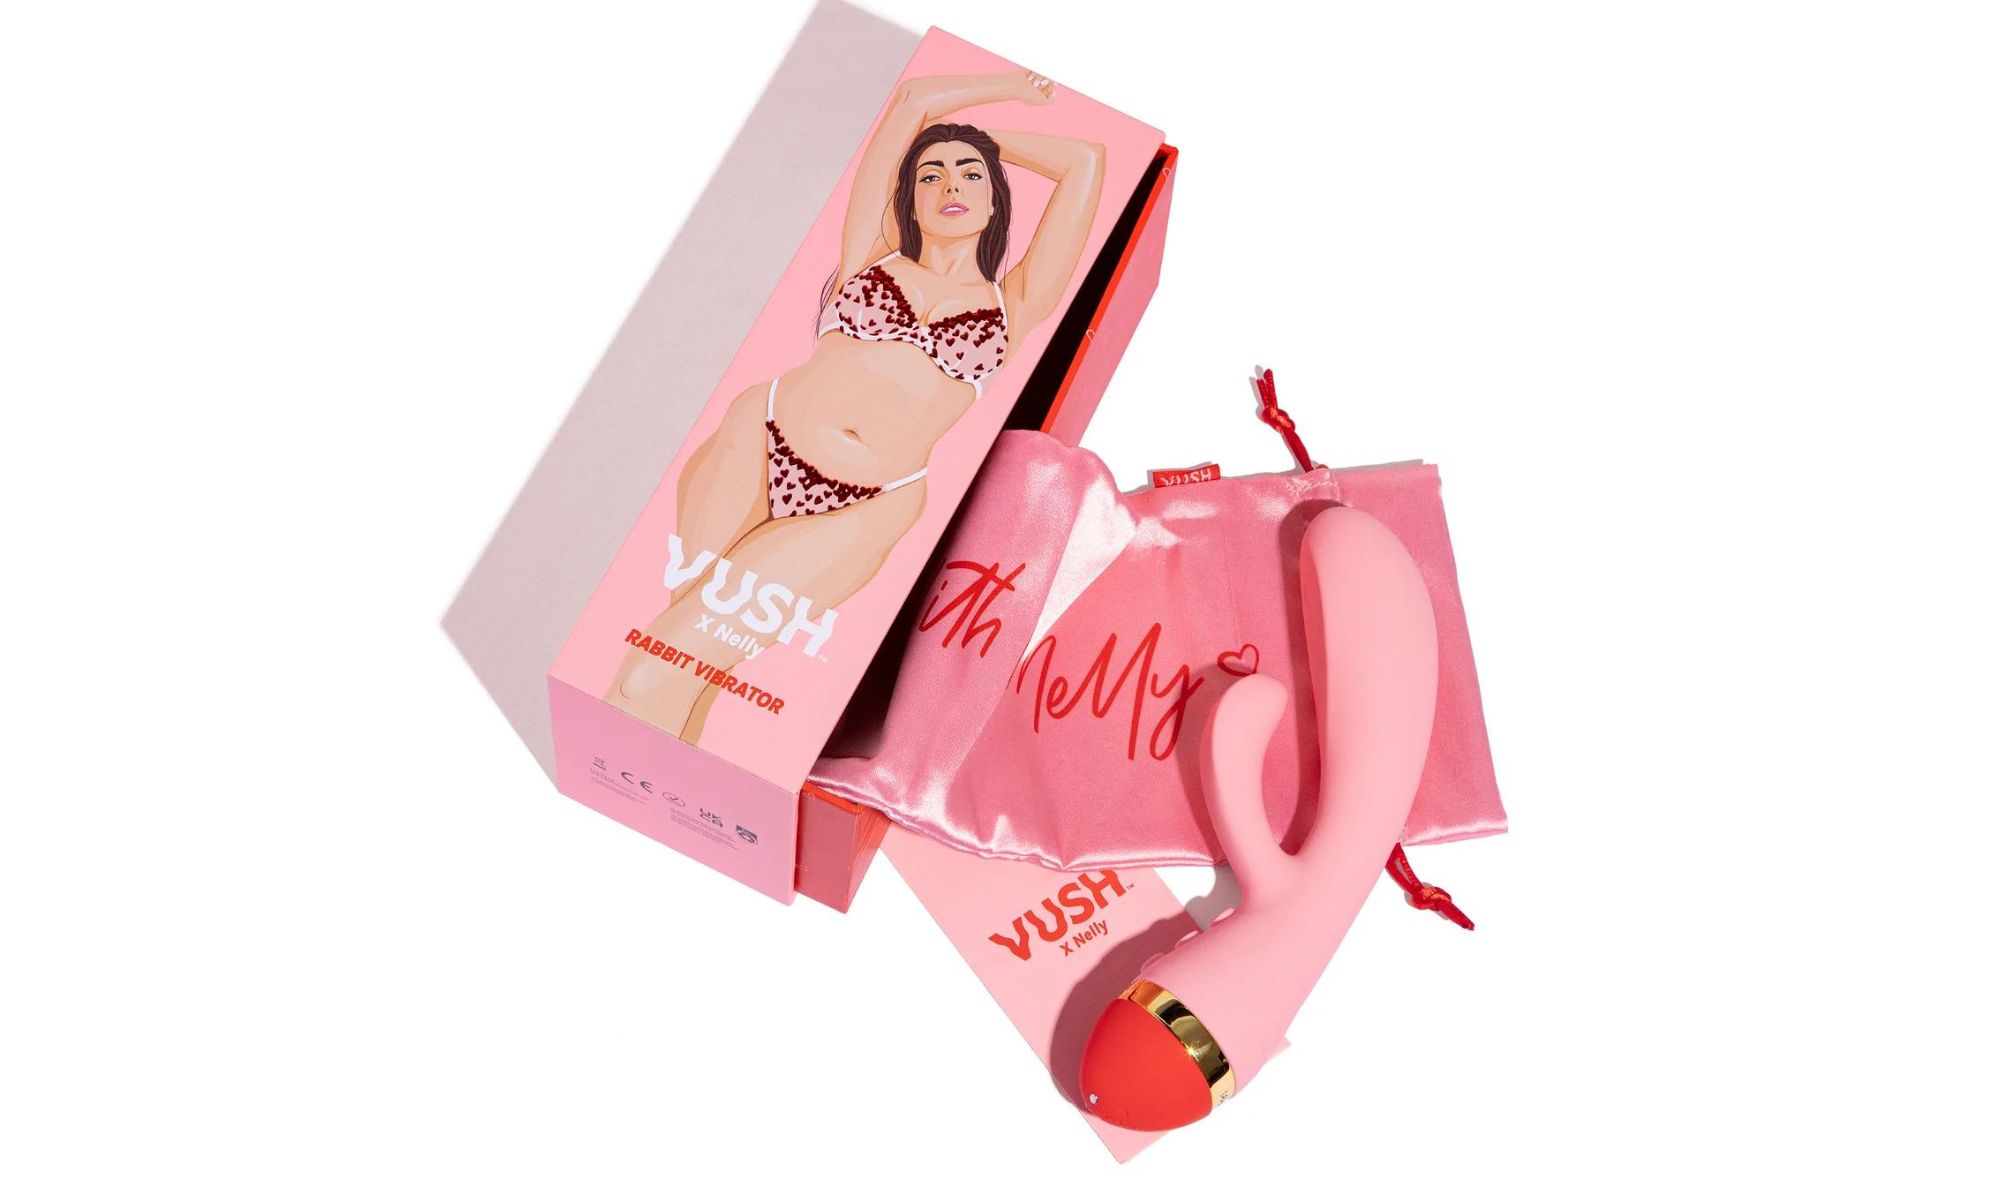 VUSH teams up with Nelly London on new vibrator customers are